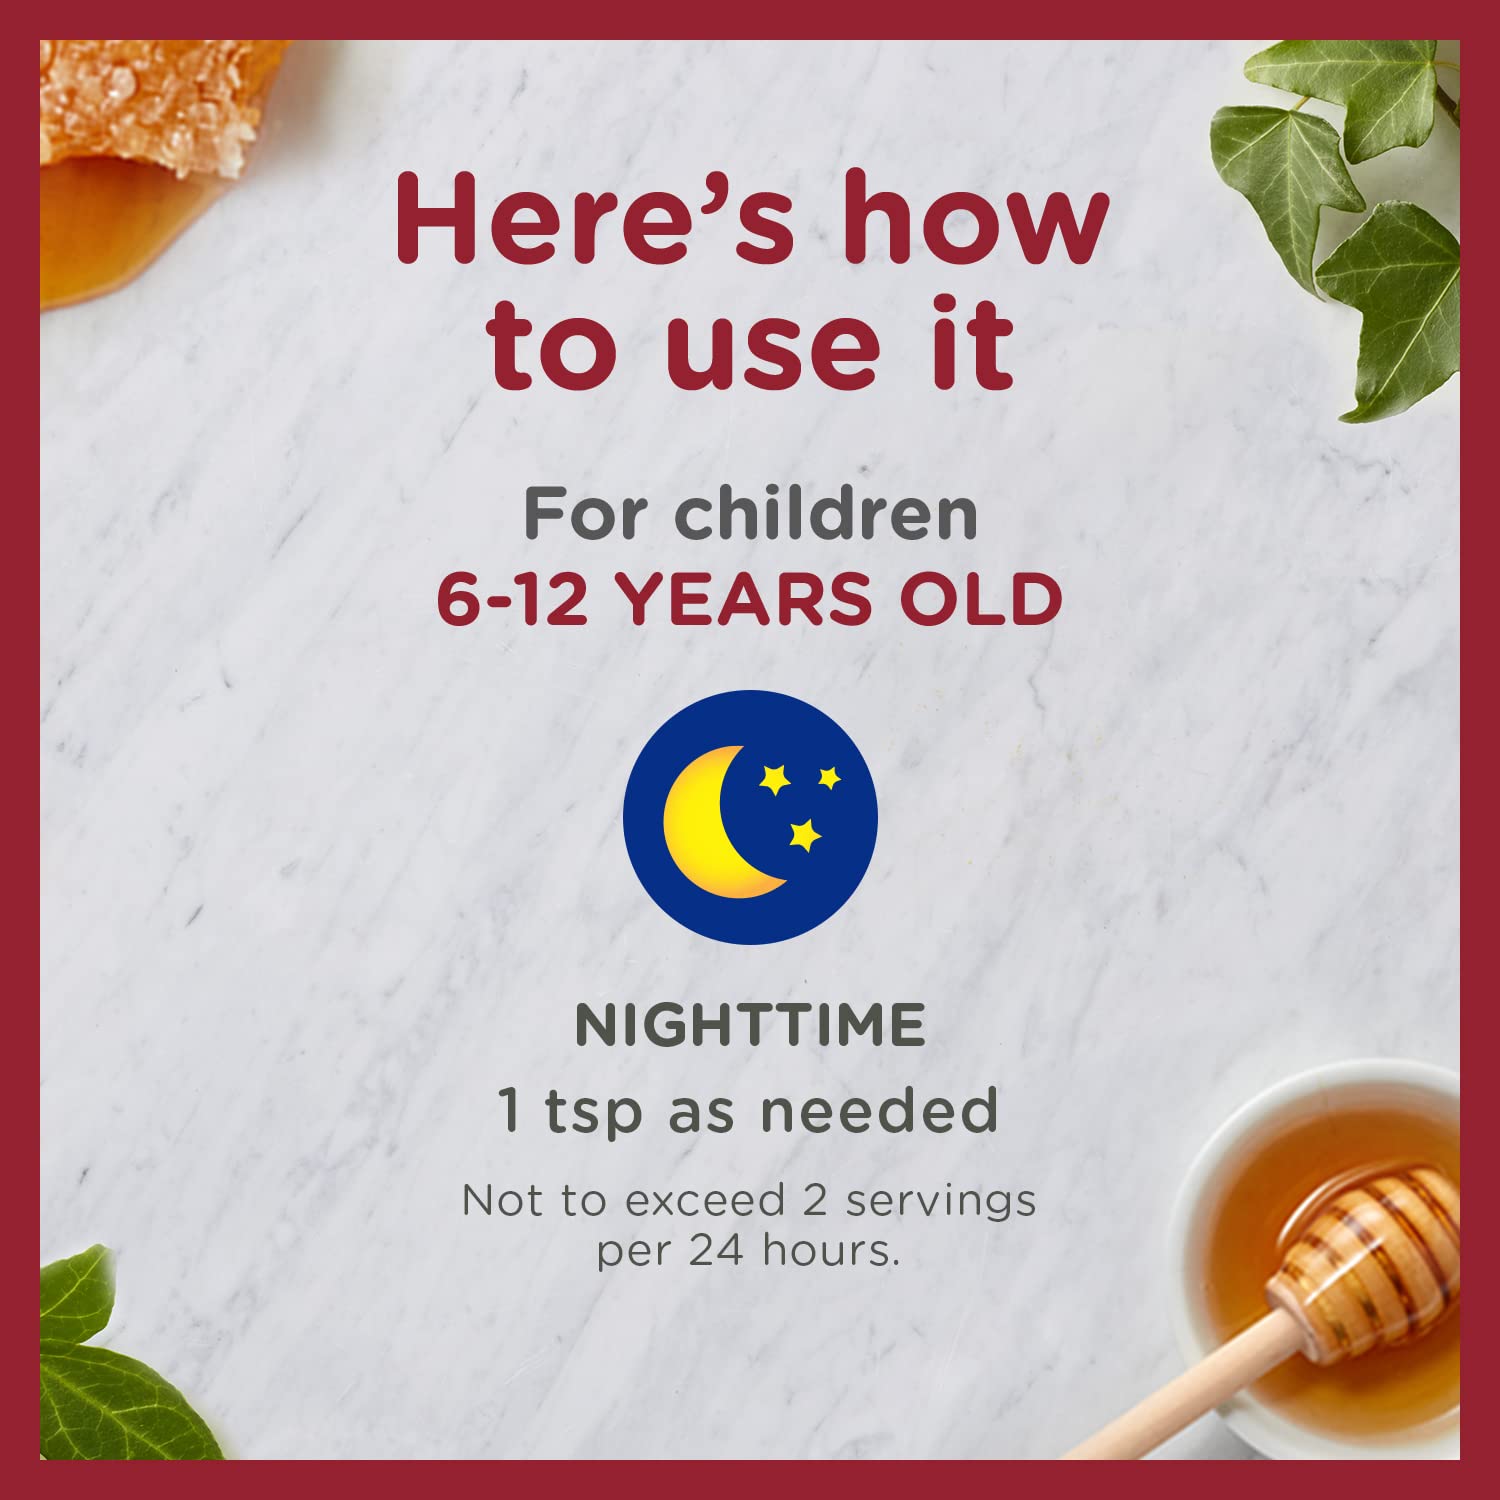 Zarbee's Kids All-in-One Nighttime Cough for Children 6-12 with Dark Honey, Turmeric, B-Vitamins & Zinc, 1 Pediatrician Recommended, Drug & Alcohol-Free, Grape Flavor, 4FL Oz